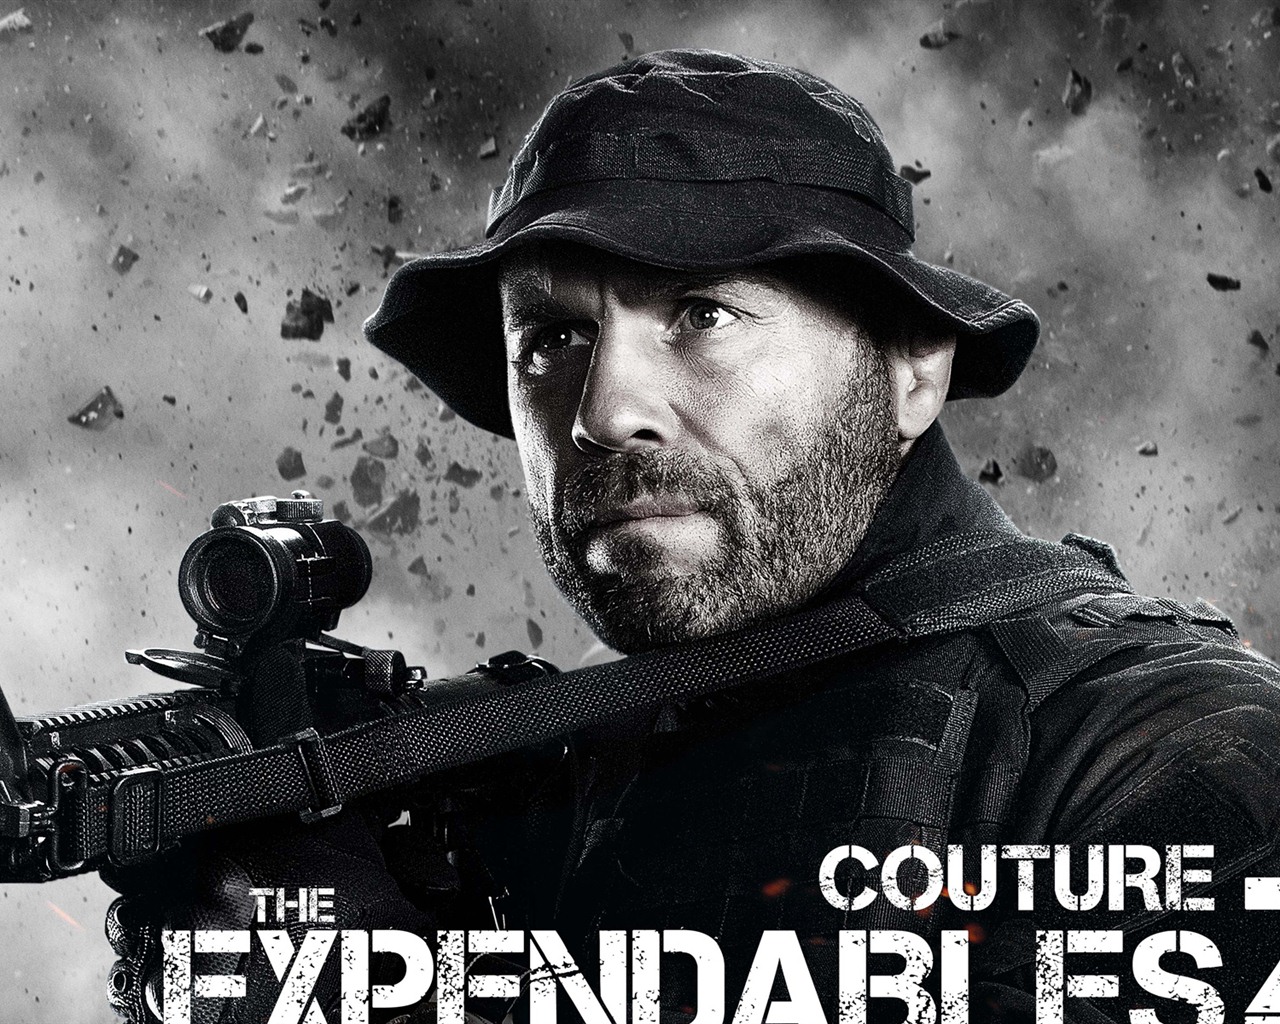 2012 Expendables2 HDの壁紙 #8 - 1280x1024